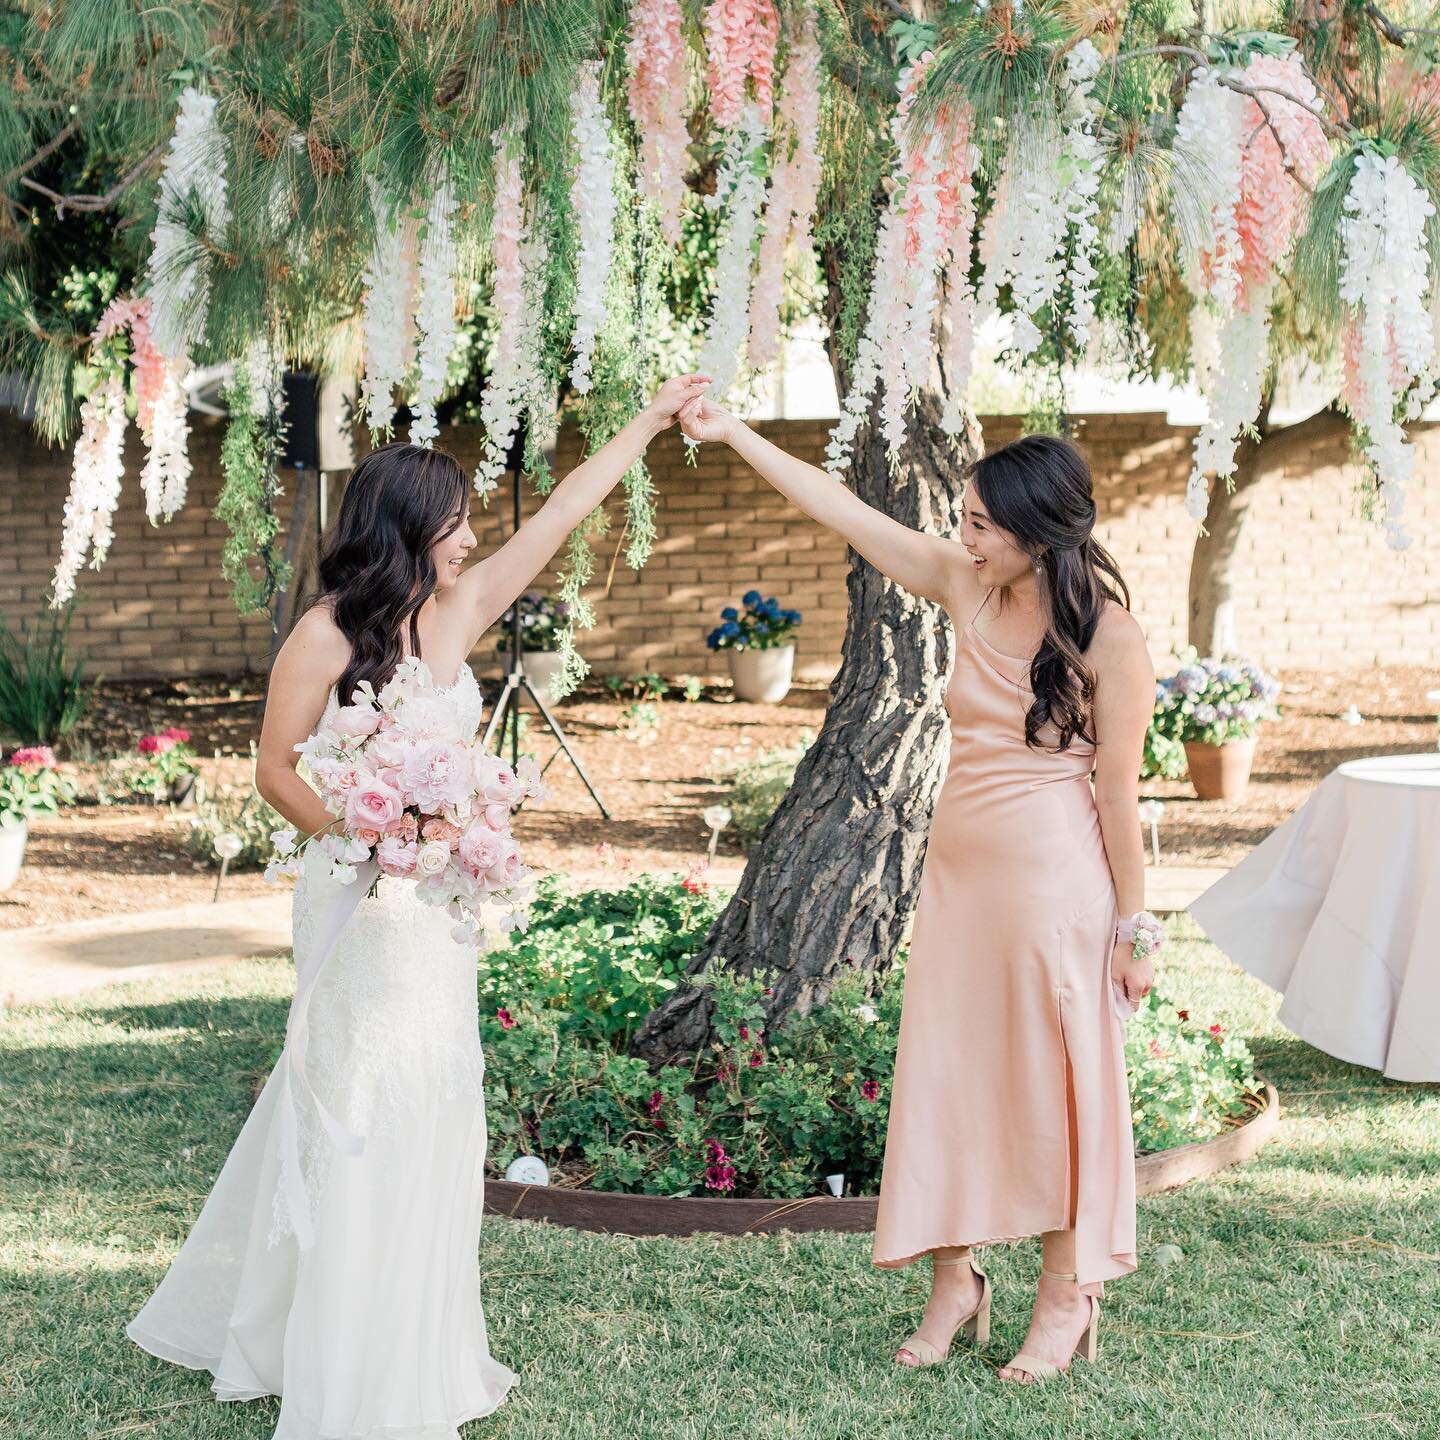 &ldquo;A friend is one who overlooks your broken fence and admires the flowers in your garden.&rdquo; I love the this photo of the bride and her maid of honor, their friendship captured. 

Photographer: @donnalamphotography 
Event planning: @milkeven